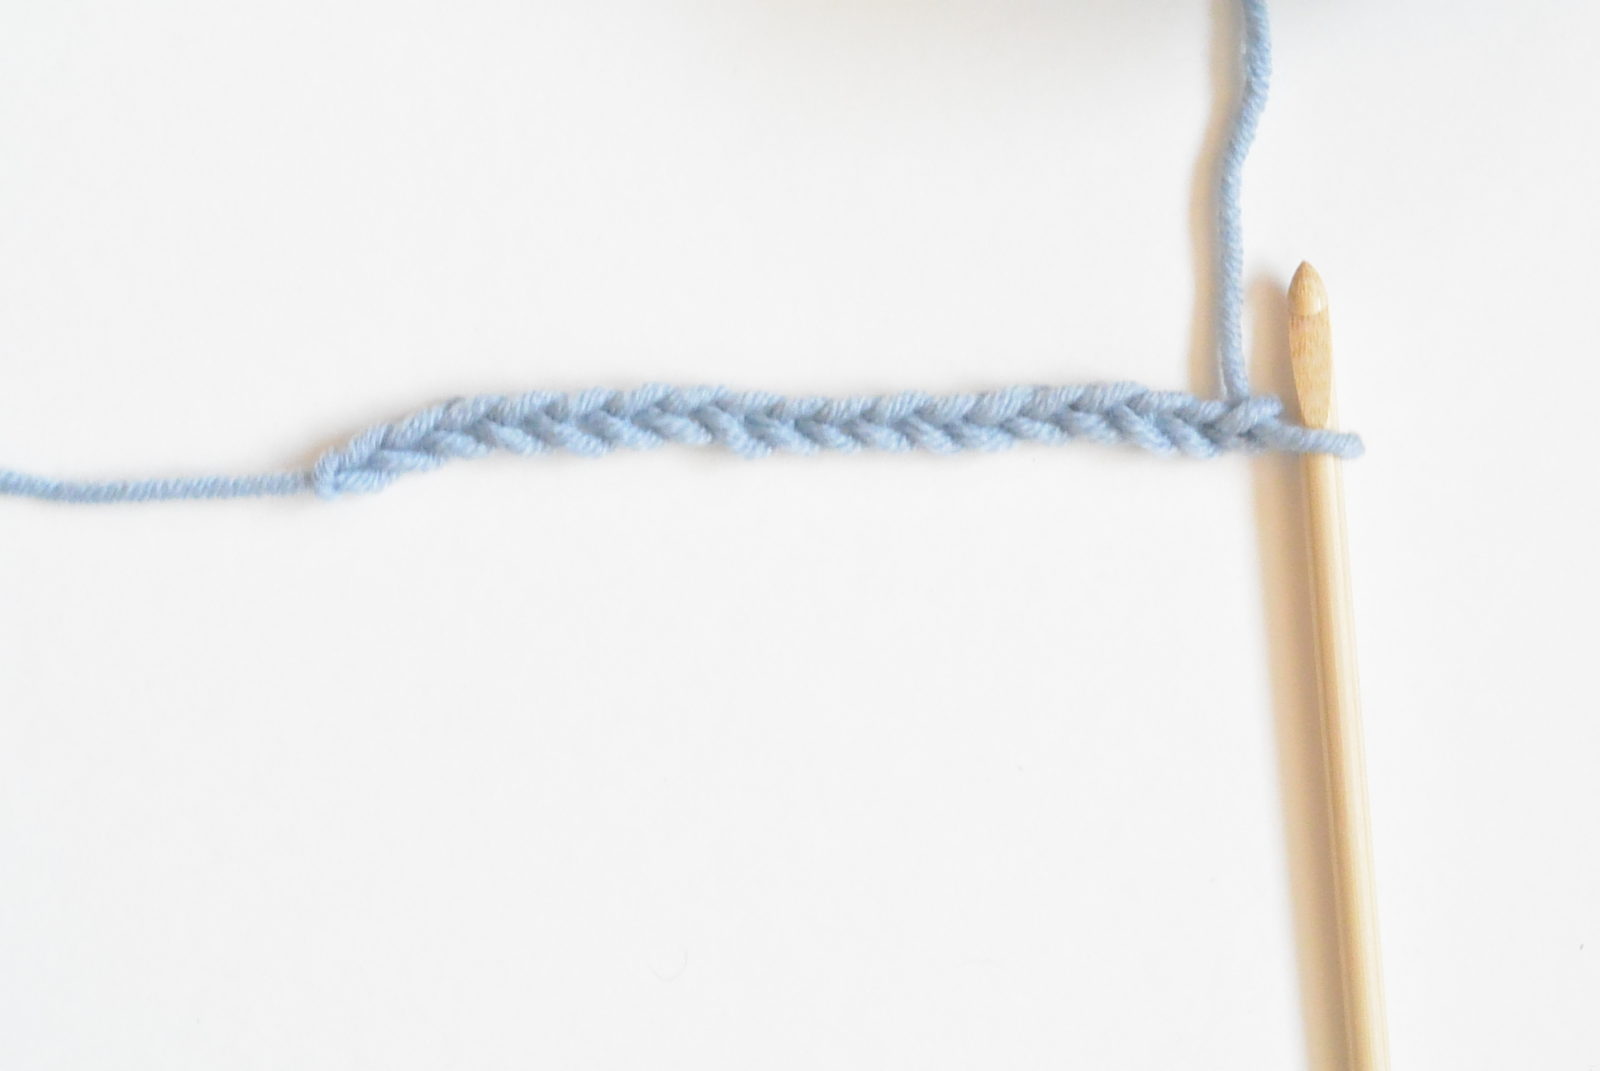 How To Crochet the Even Moss Stitch – Mama In A Stitch